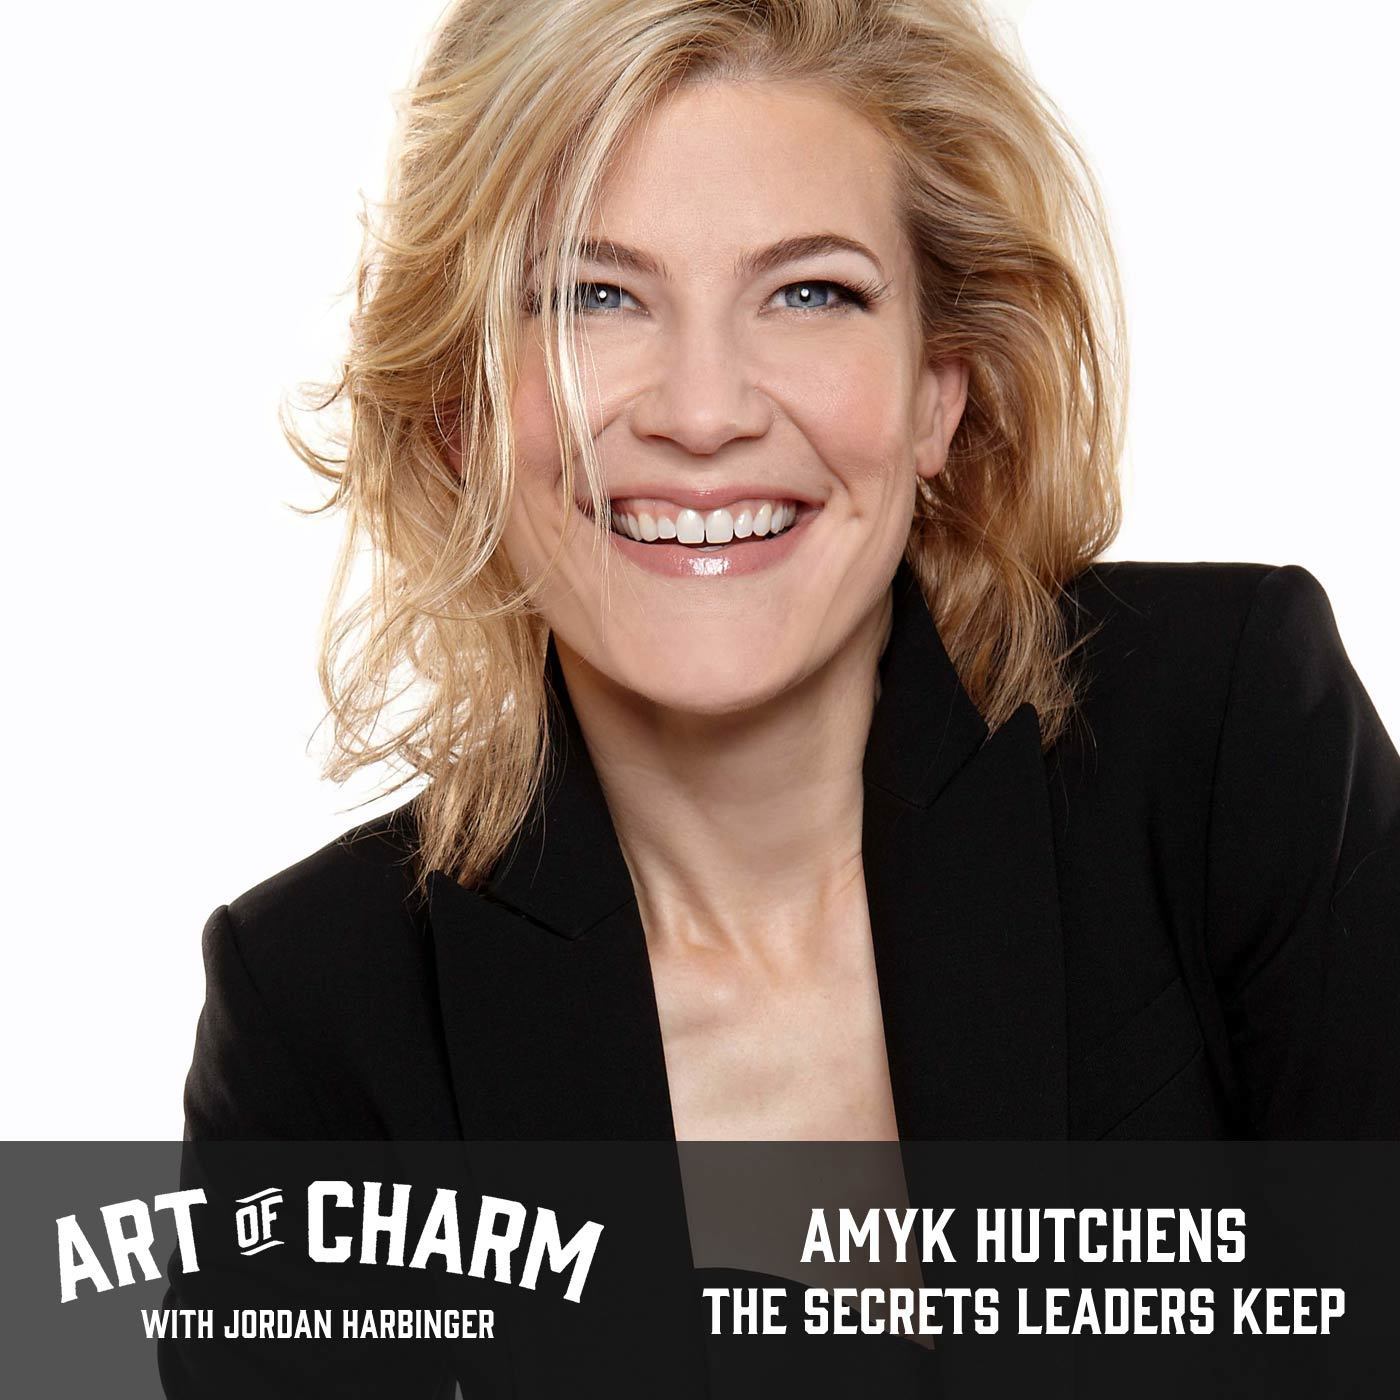 The Art of Charm